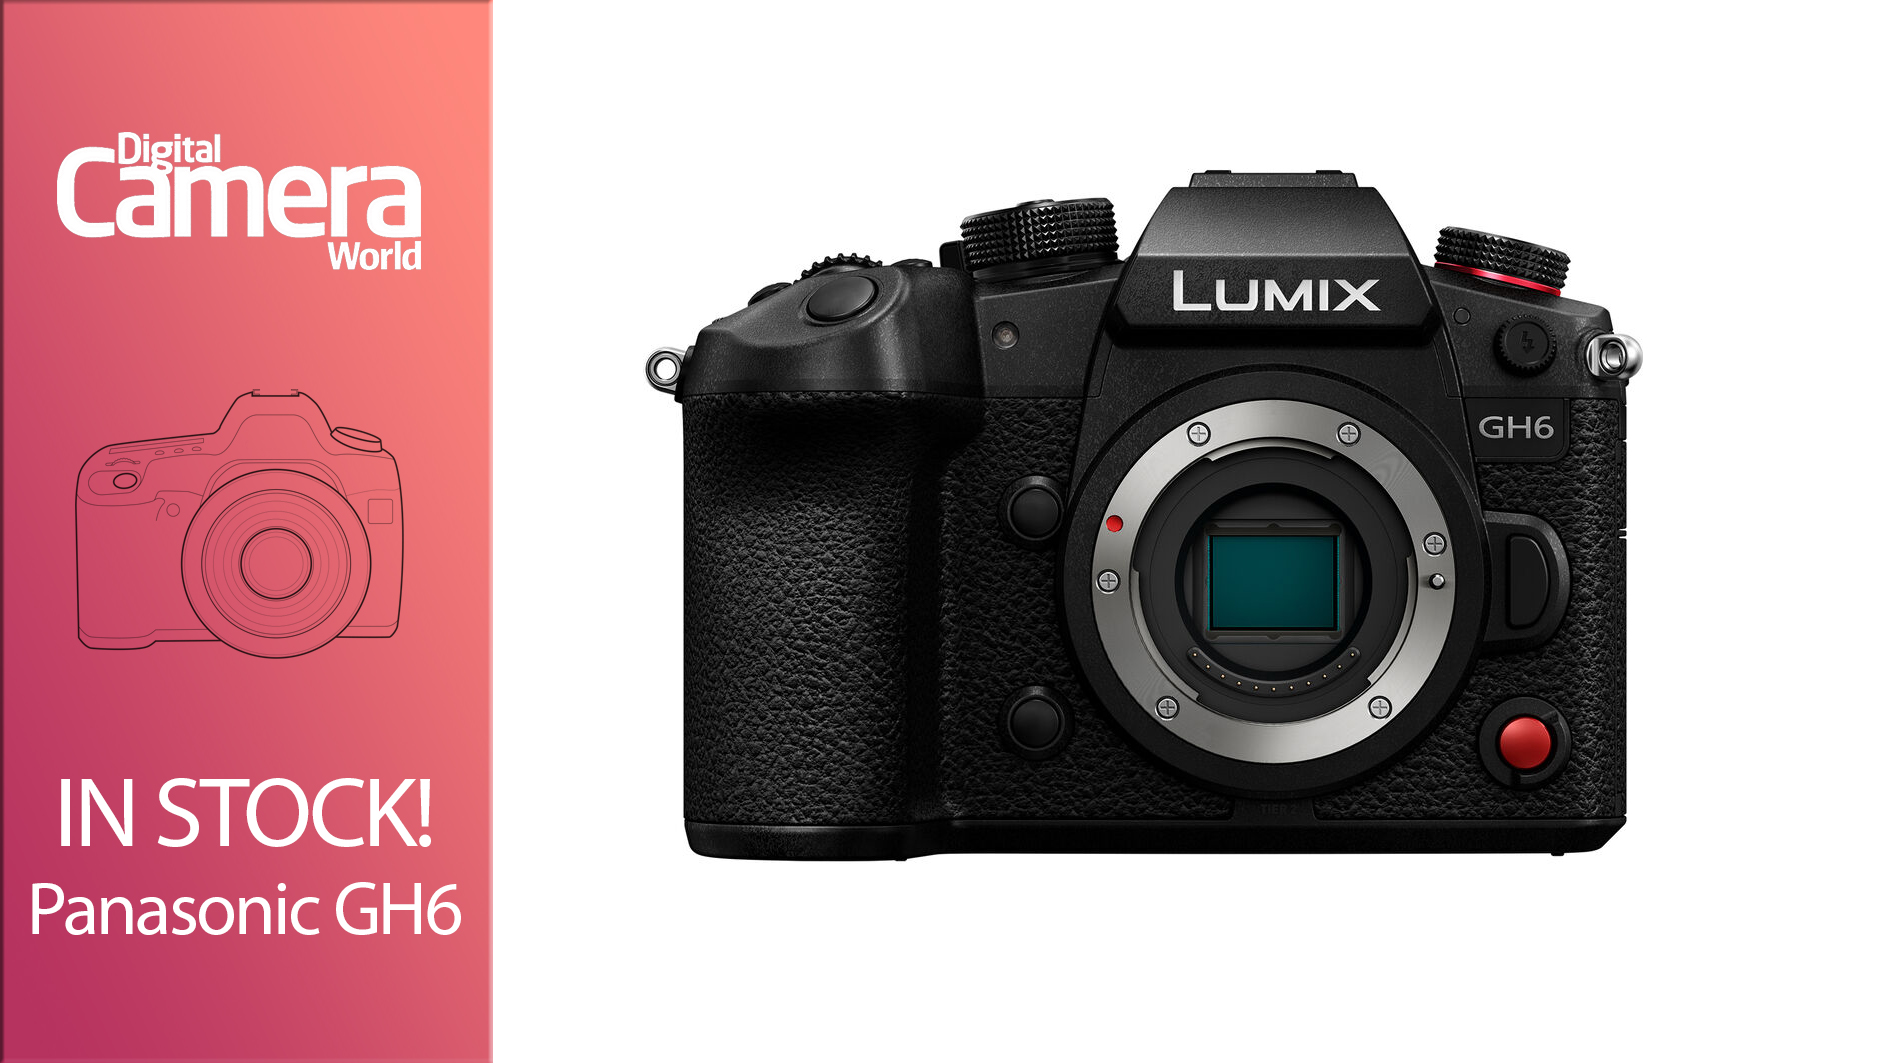 Fluisteren Baleinwalvis dief Panasonic GH6 now in stock at UK stores – get your order in while you can |  Digital Camera World